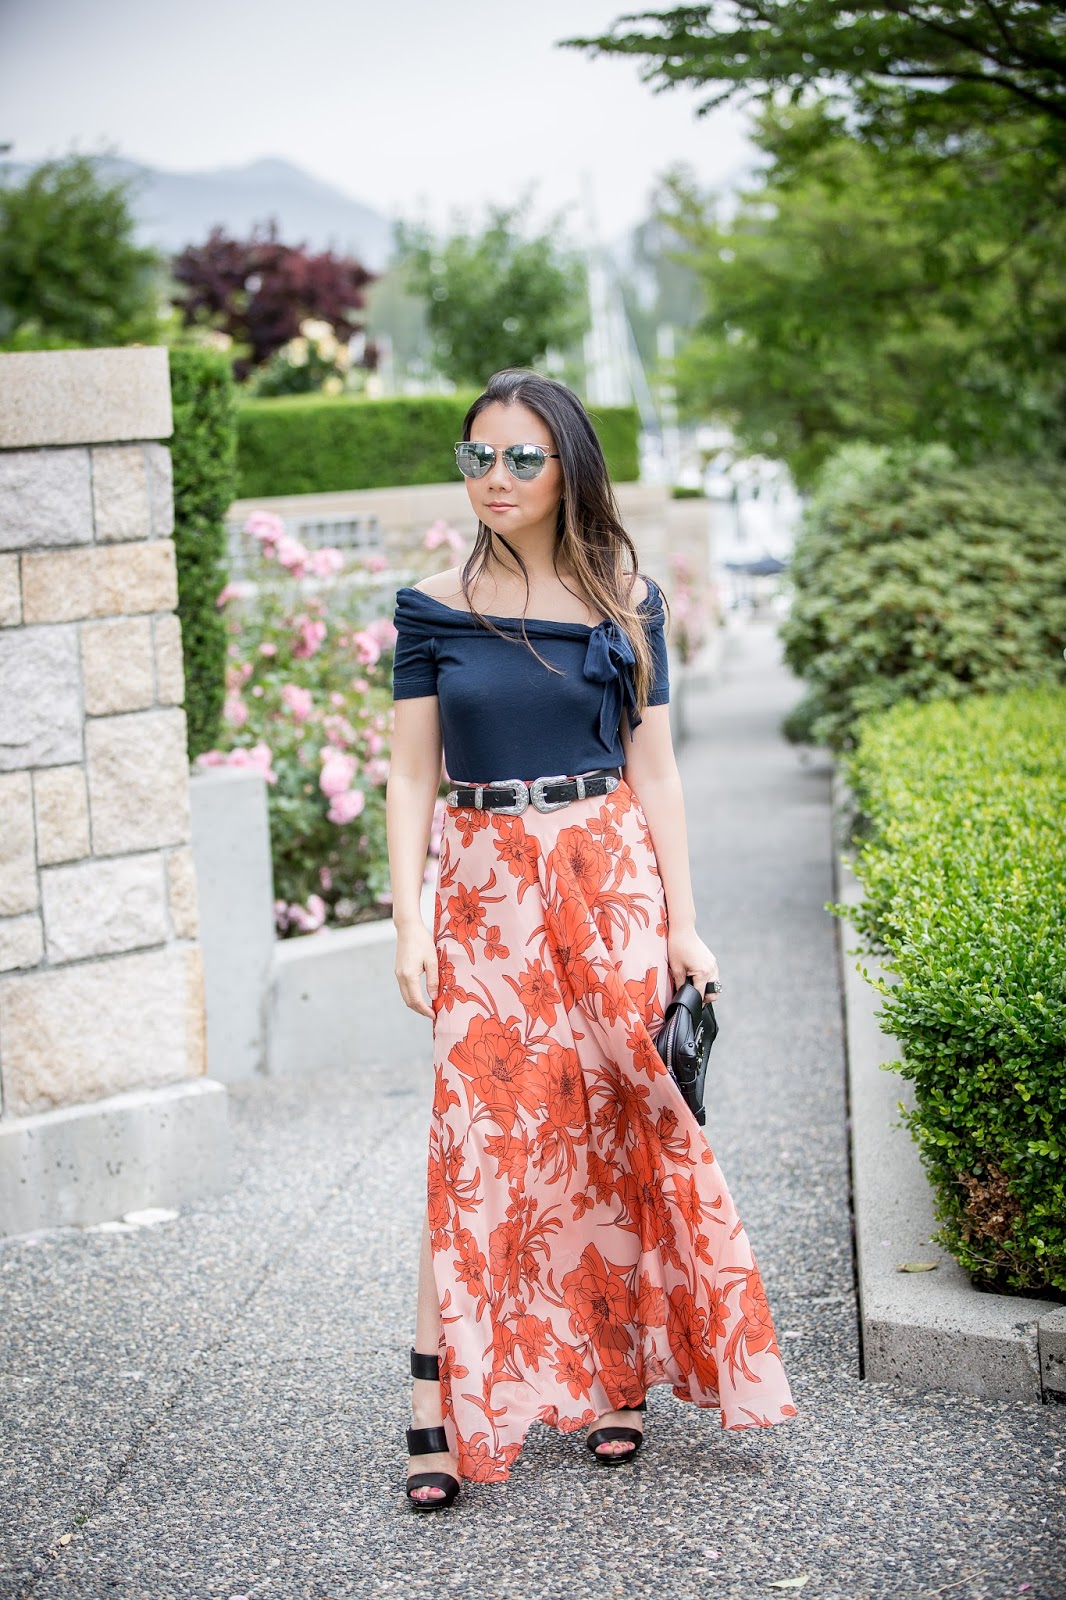 Valentina and Aveline: How To Wear Maxi Skirt This Summer